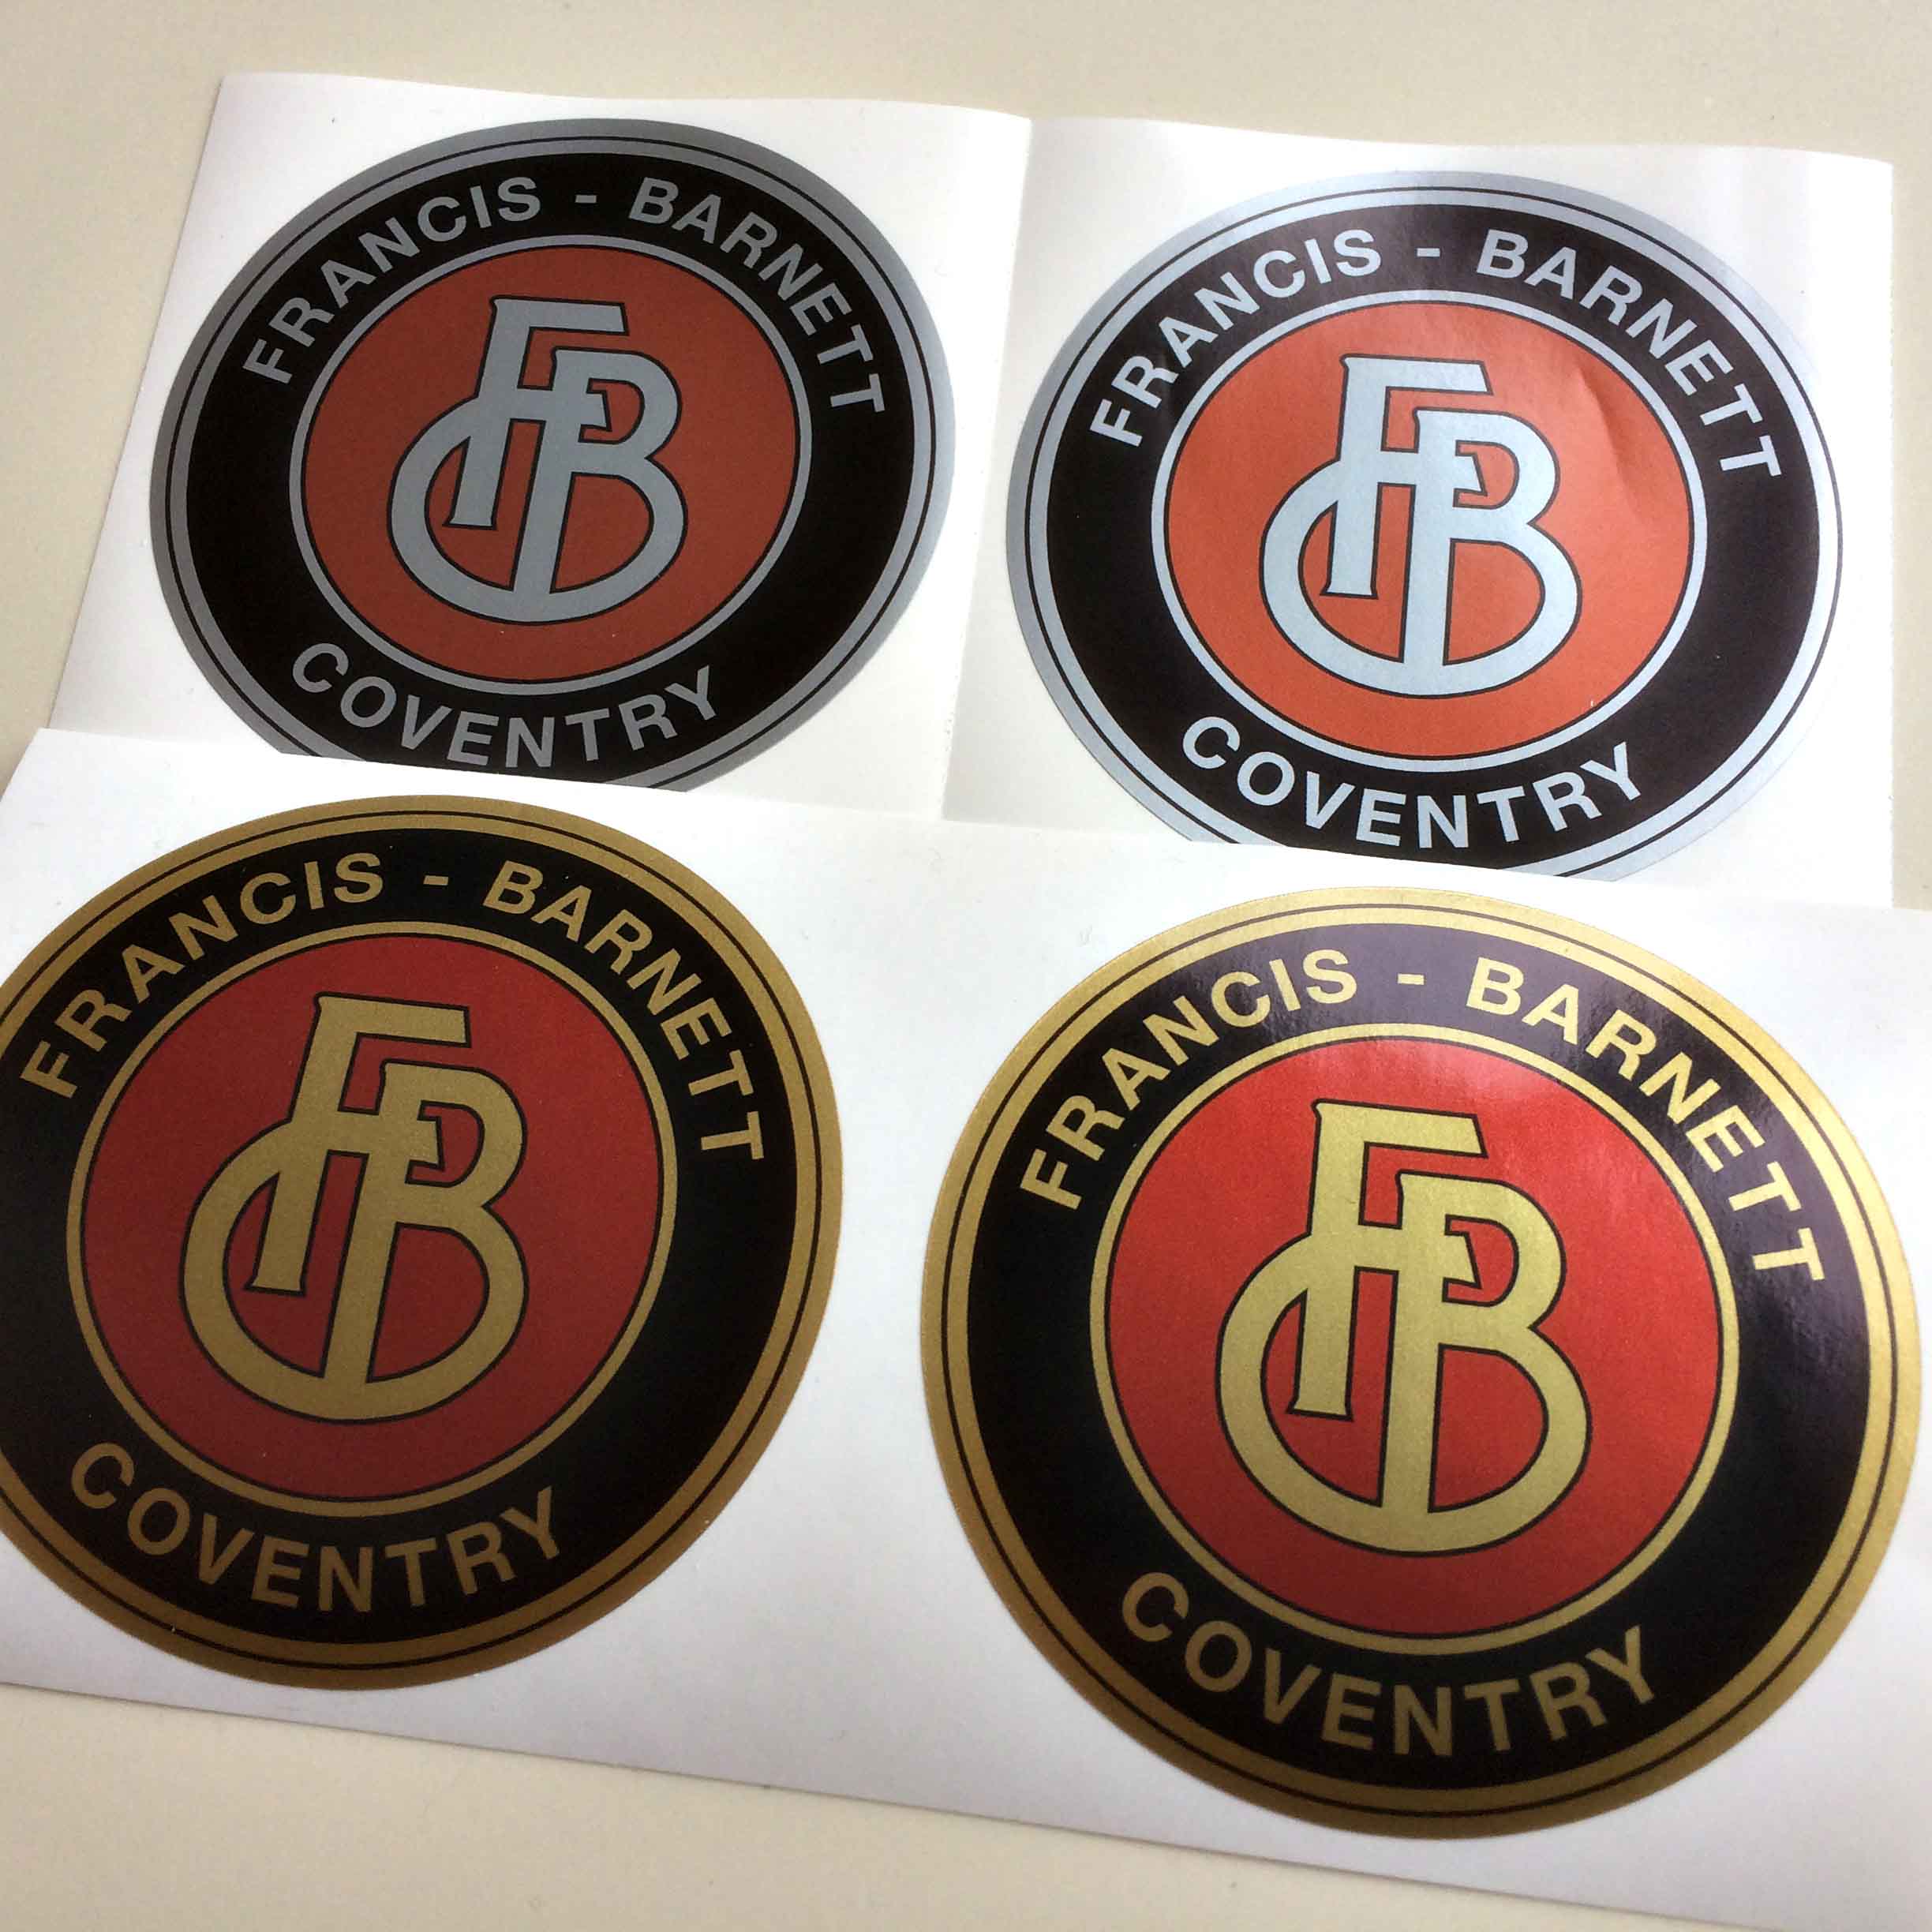 FRANCIS BARNETT VINTAGE STICKERS. Francis - Barnett Coventry in gold or silver lettering surrounds a black circle with a gold or silver border. In the centre on a red circle are the initials FBC in gold or silver.